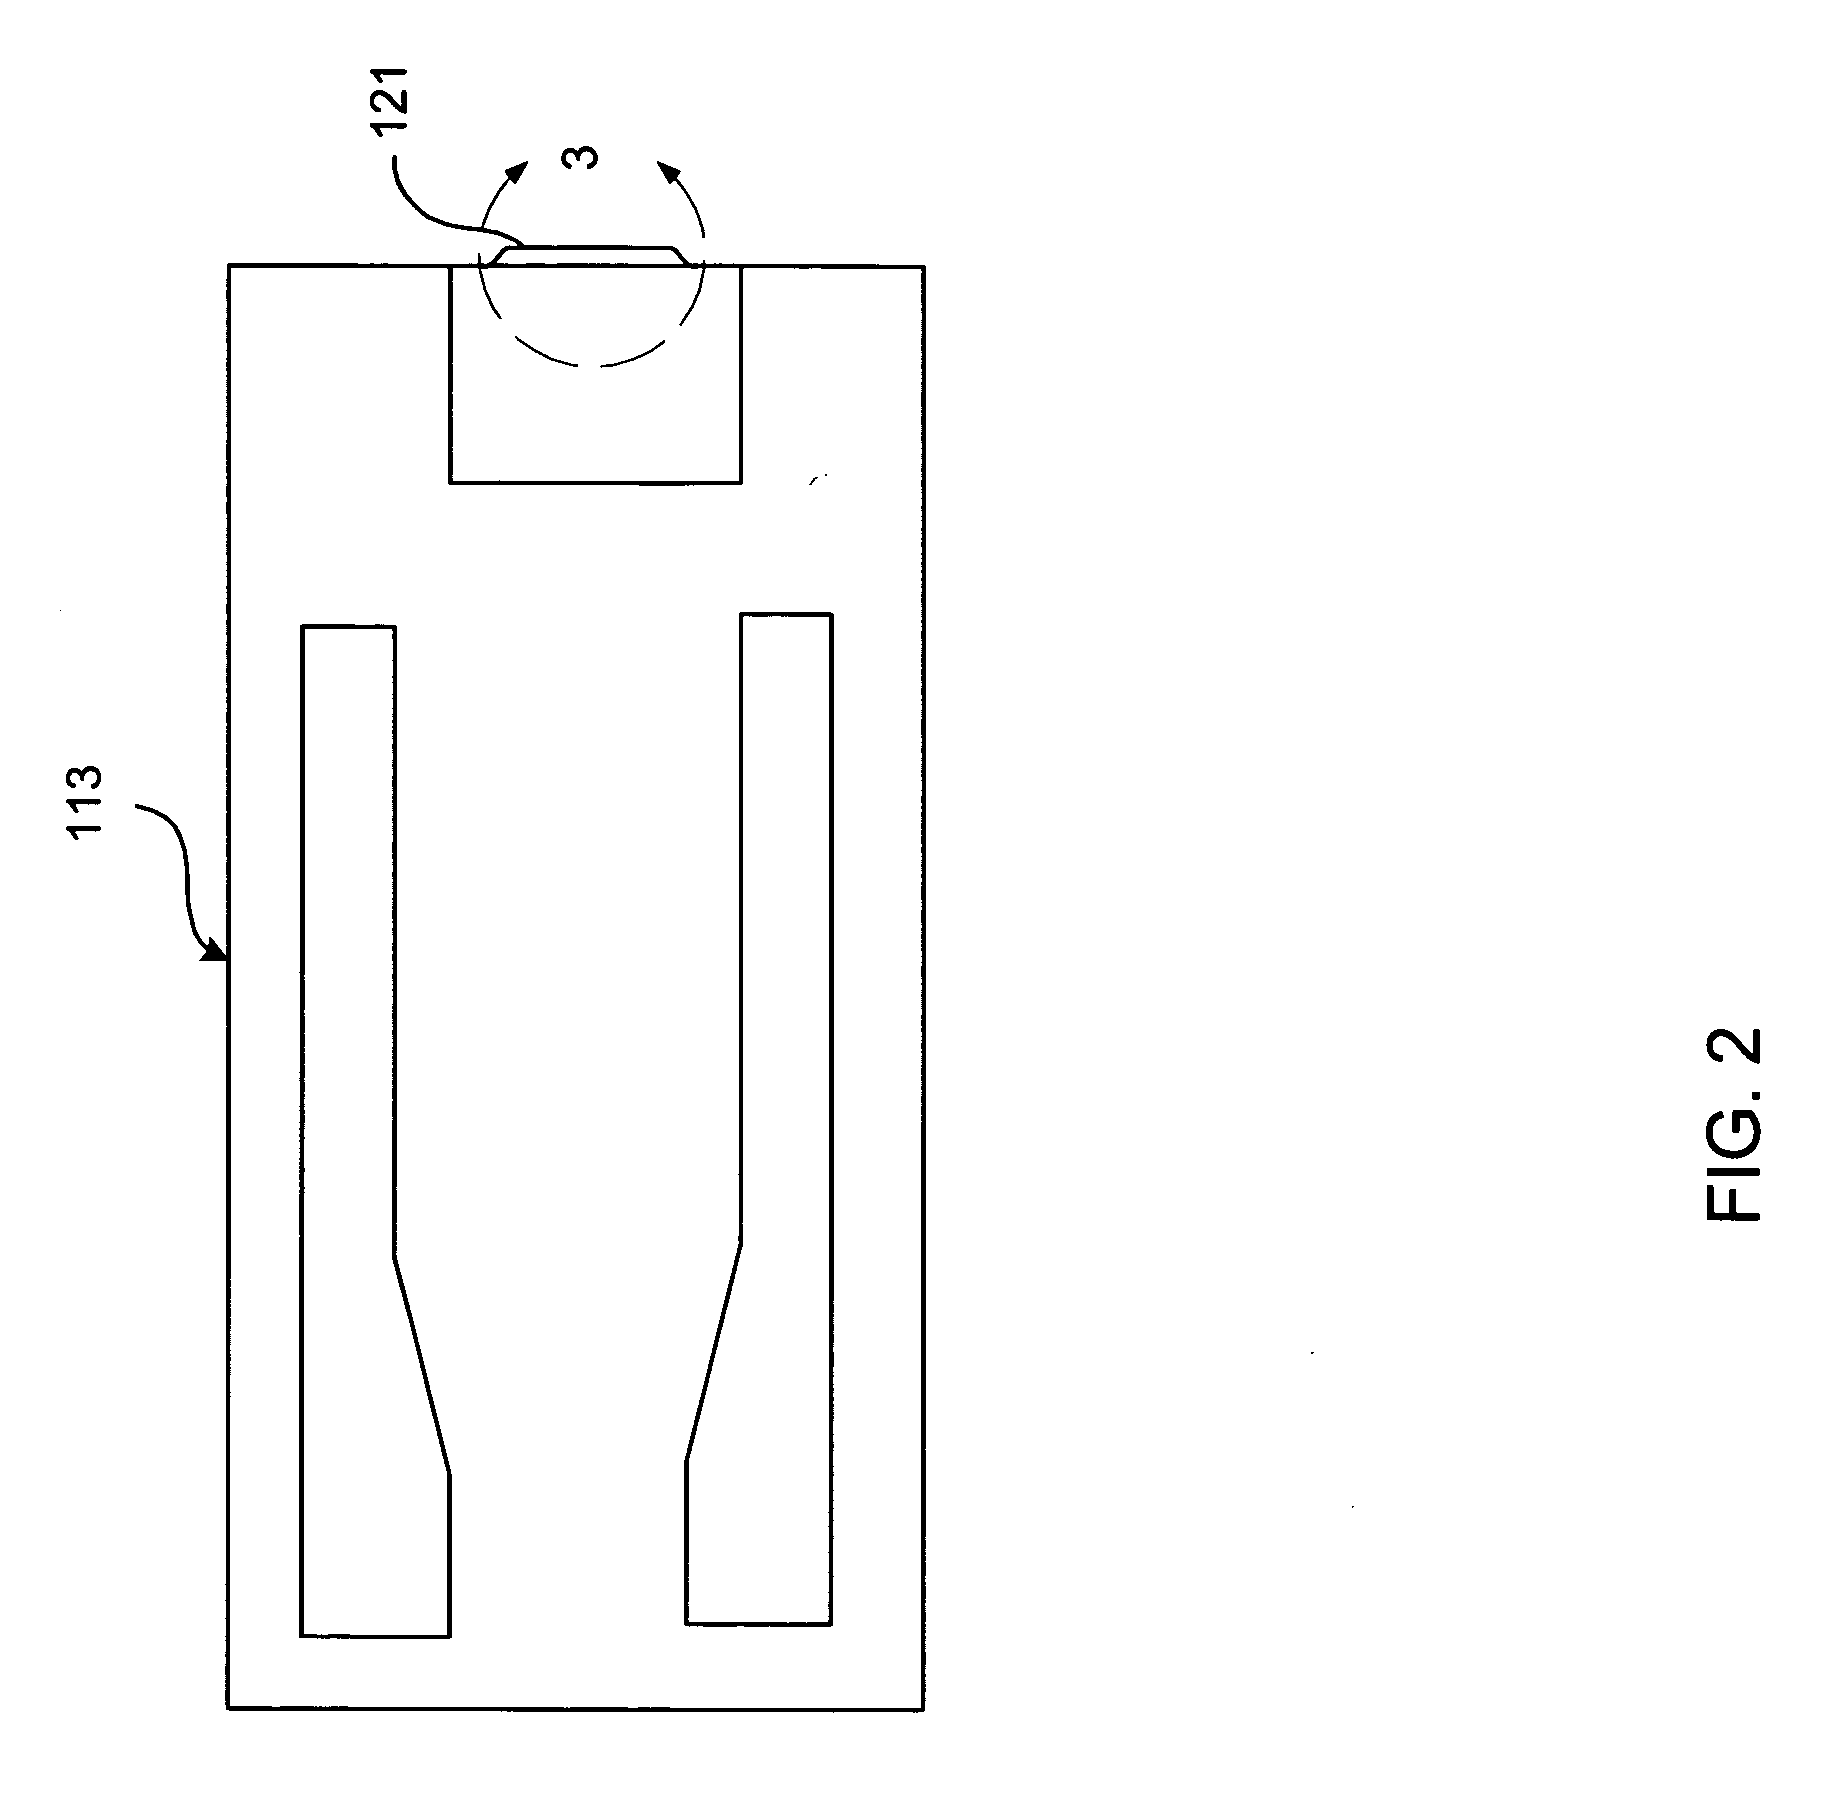 CPP differential GMR sensor having antiparallel stabilized free layers for perpendicular recording